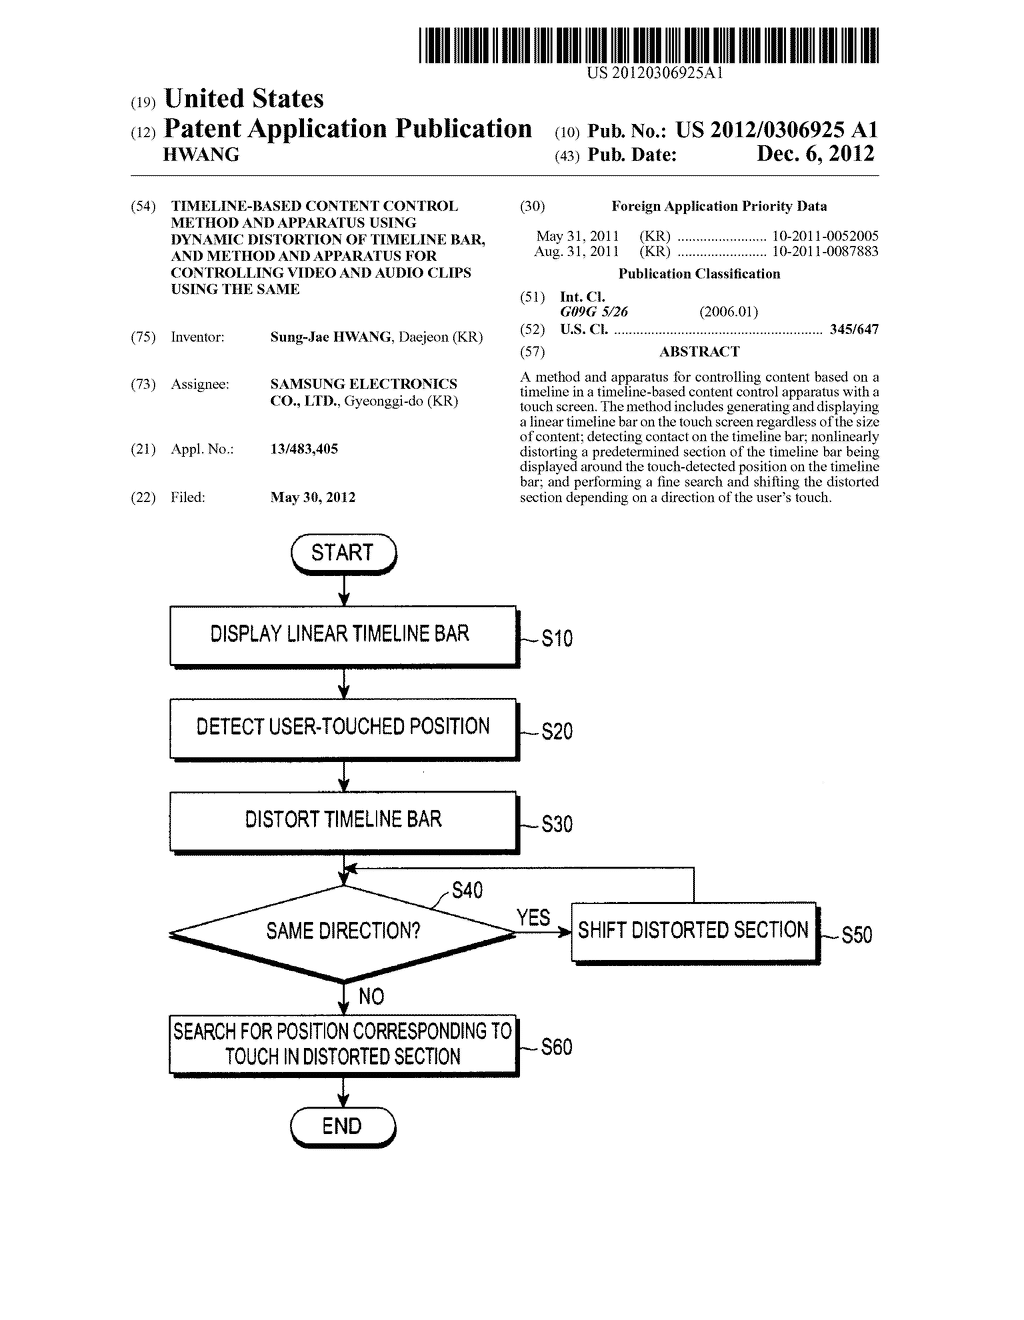 TIMELINE-BASED CONTENT CONTROL METHOD AND APPARATUS USING DYNAMIC     DISTORTION OF TIMELINE BAR, AND METHOD AND APPARATUS FOR CONTROLLING     VIDEO AND AUDIO CLIPS USING THE SAME - diagram, schematic, and image 01